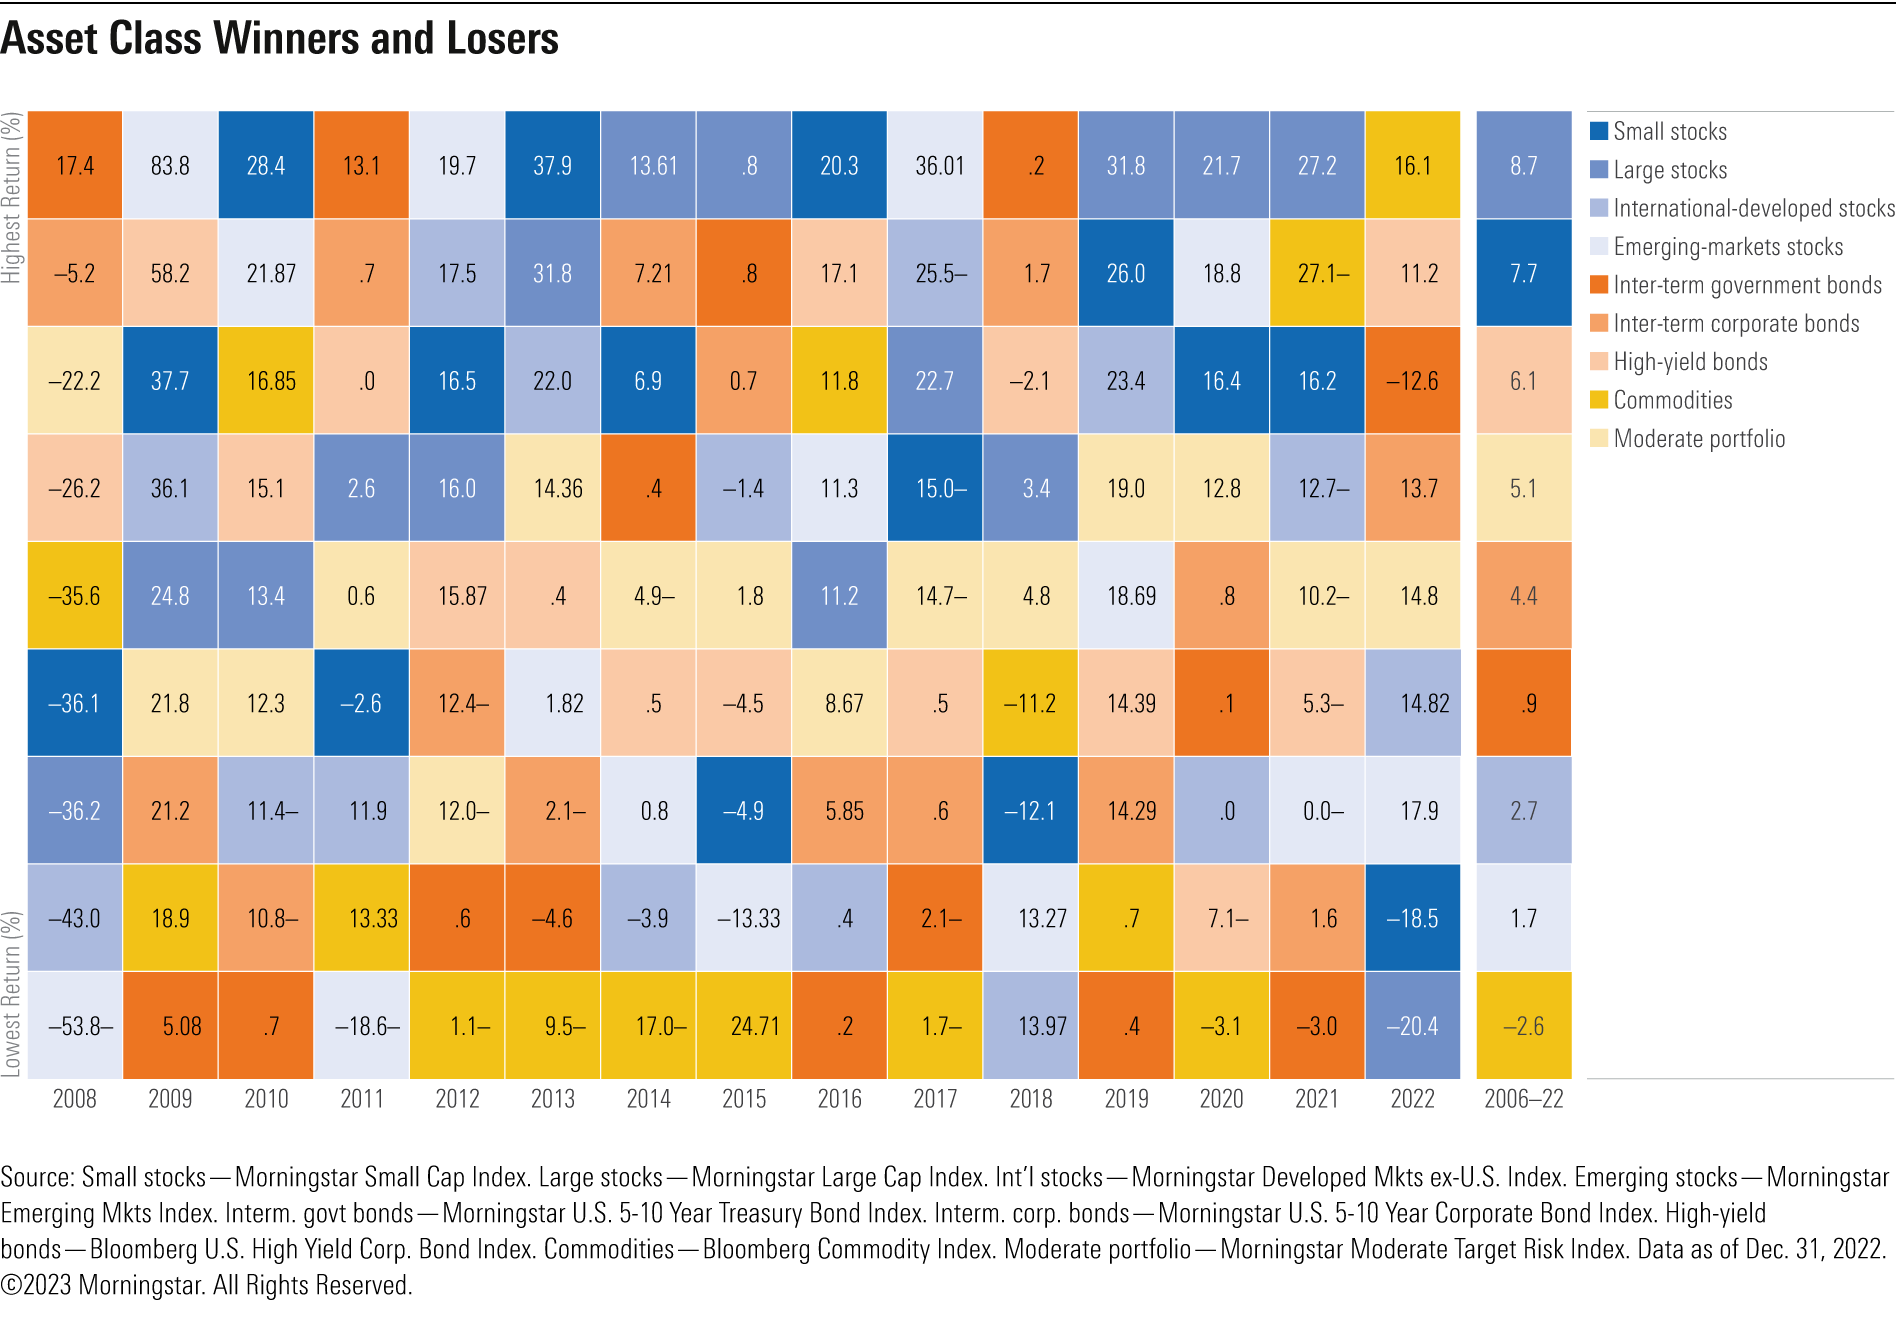 Quilt chart showing the highest and lowest returns of various asset classes between 2008 and 2022.